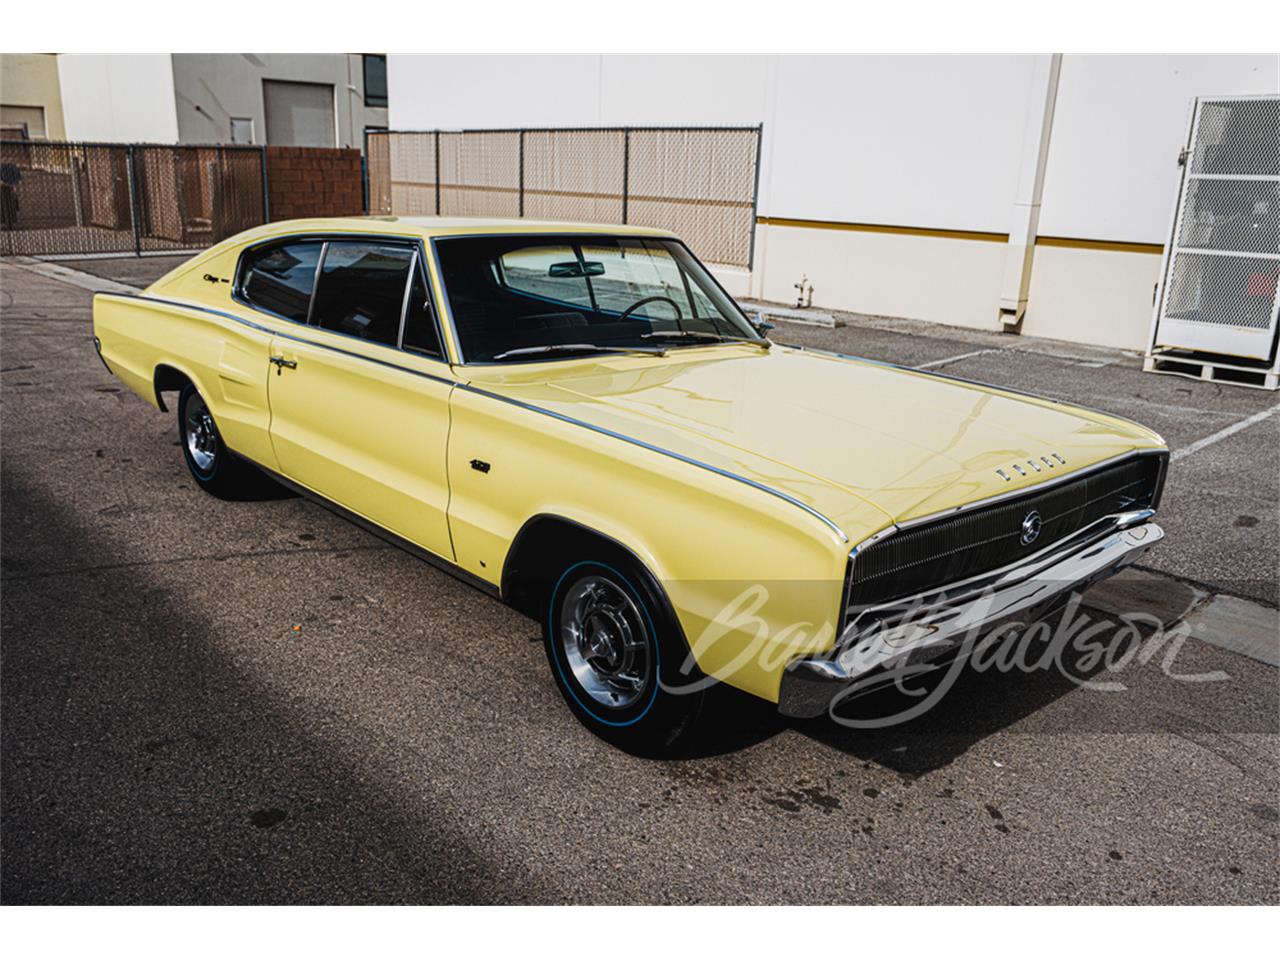 For Sale at Auction: 1966 Dodge Charger in Scottsdale, Arizona for sale in Scottsdale, AZ